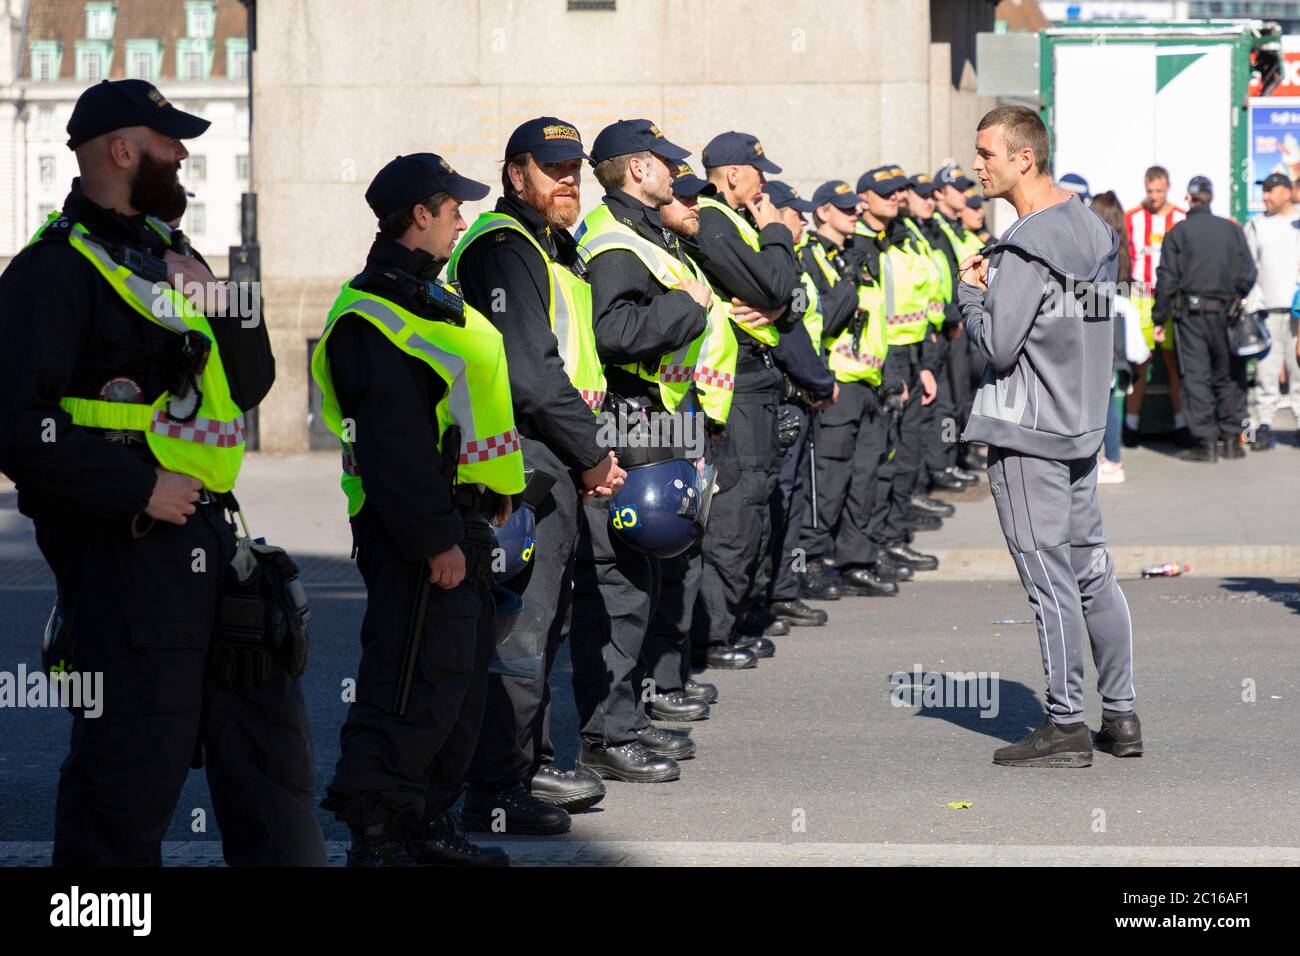 A far-right counter-protester confronts a police officer beside Westminster Bridge, London, 13 June 2020 Stock Photo